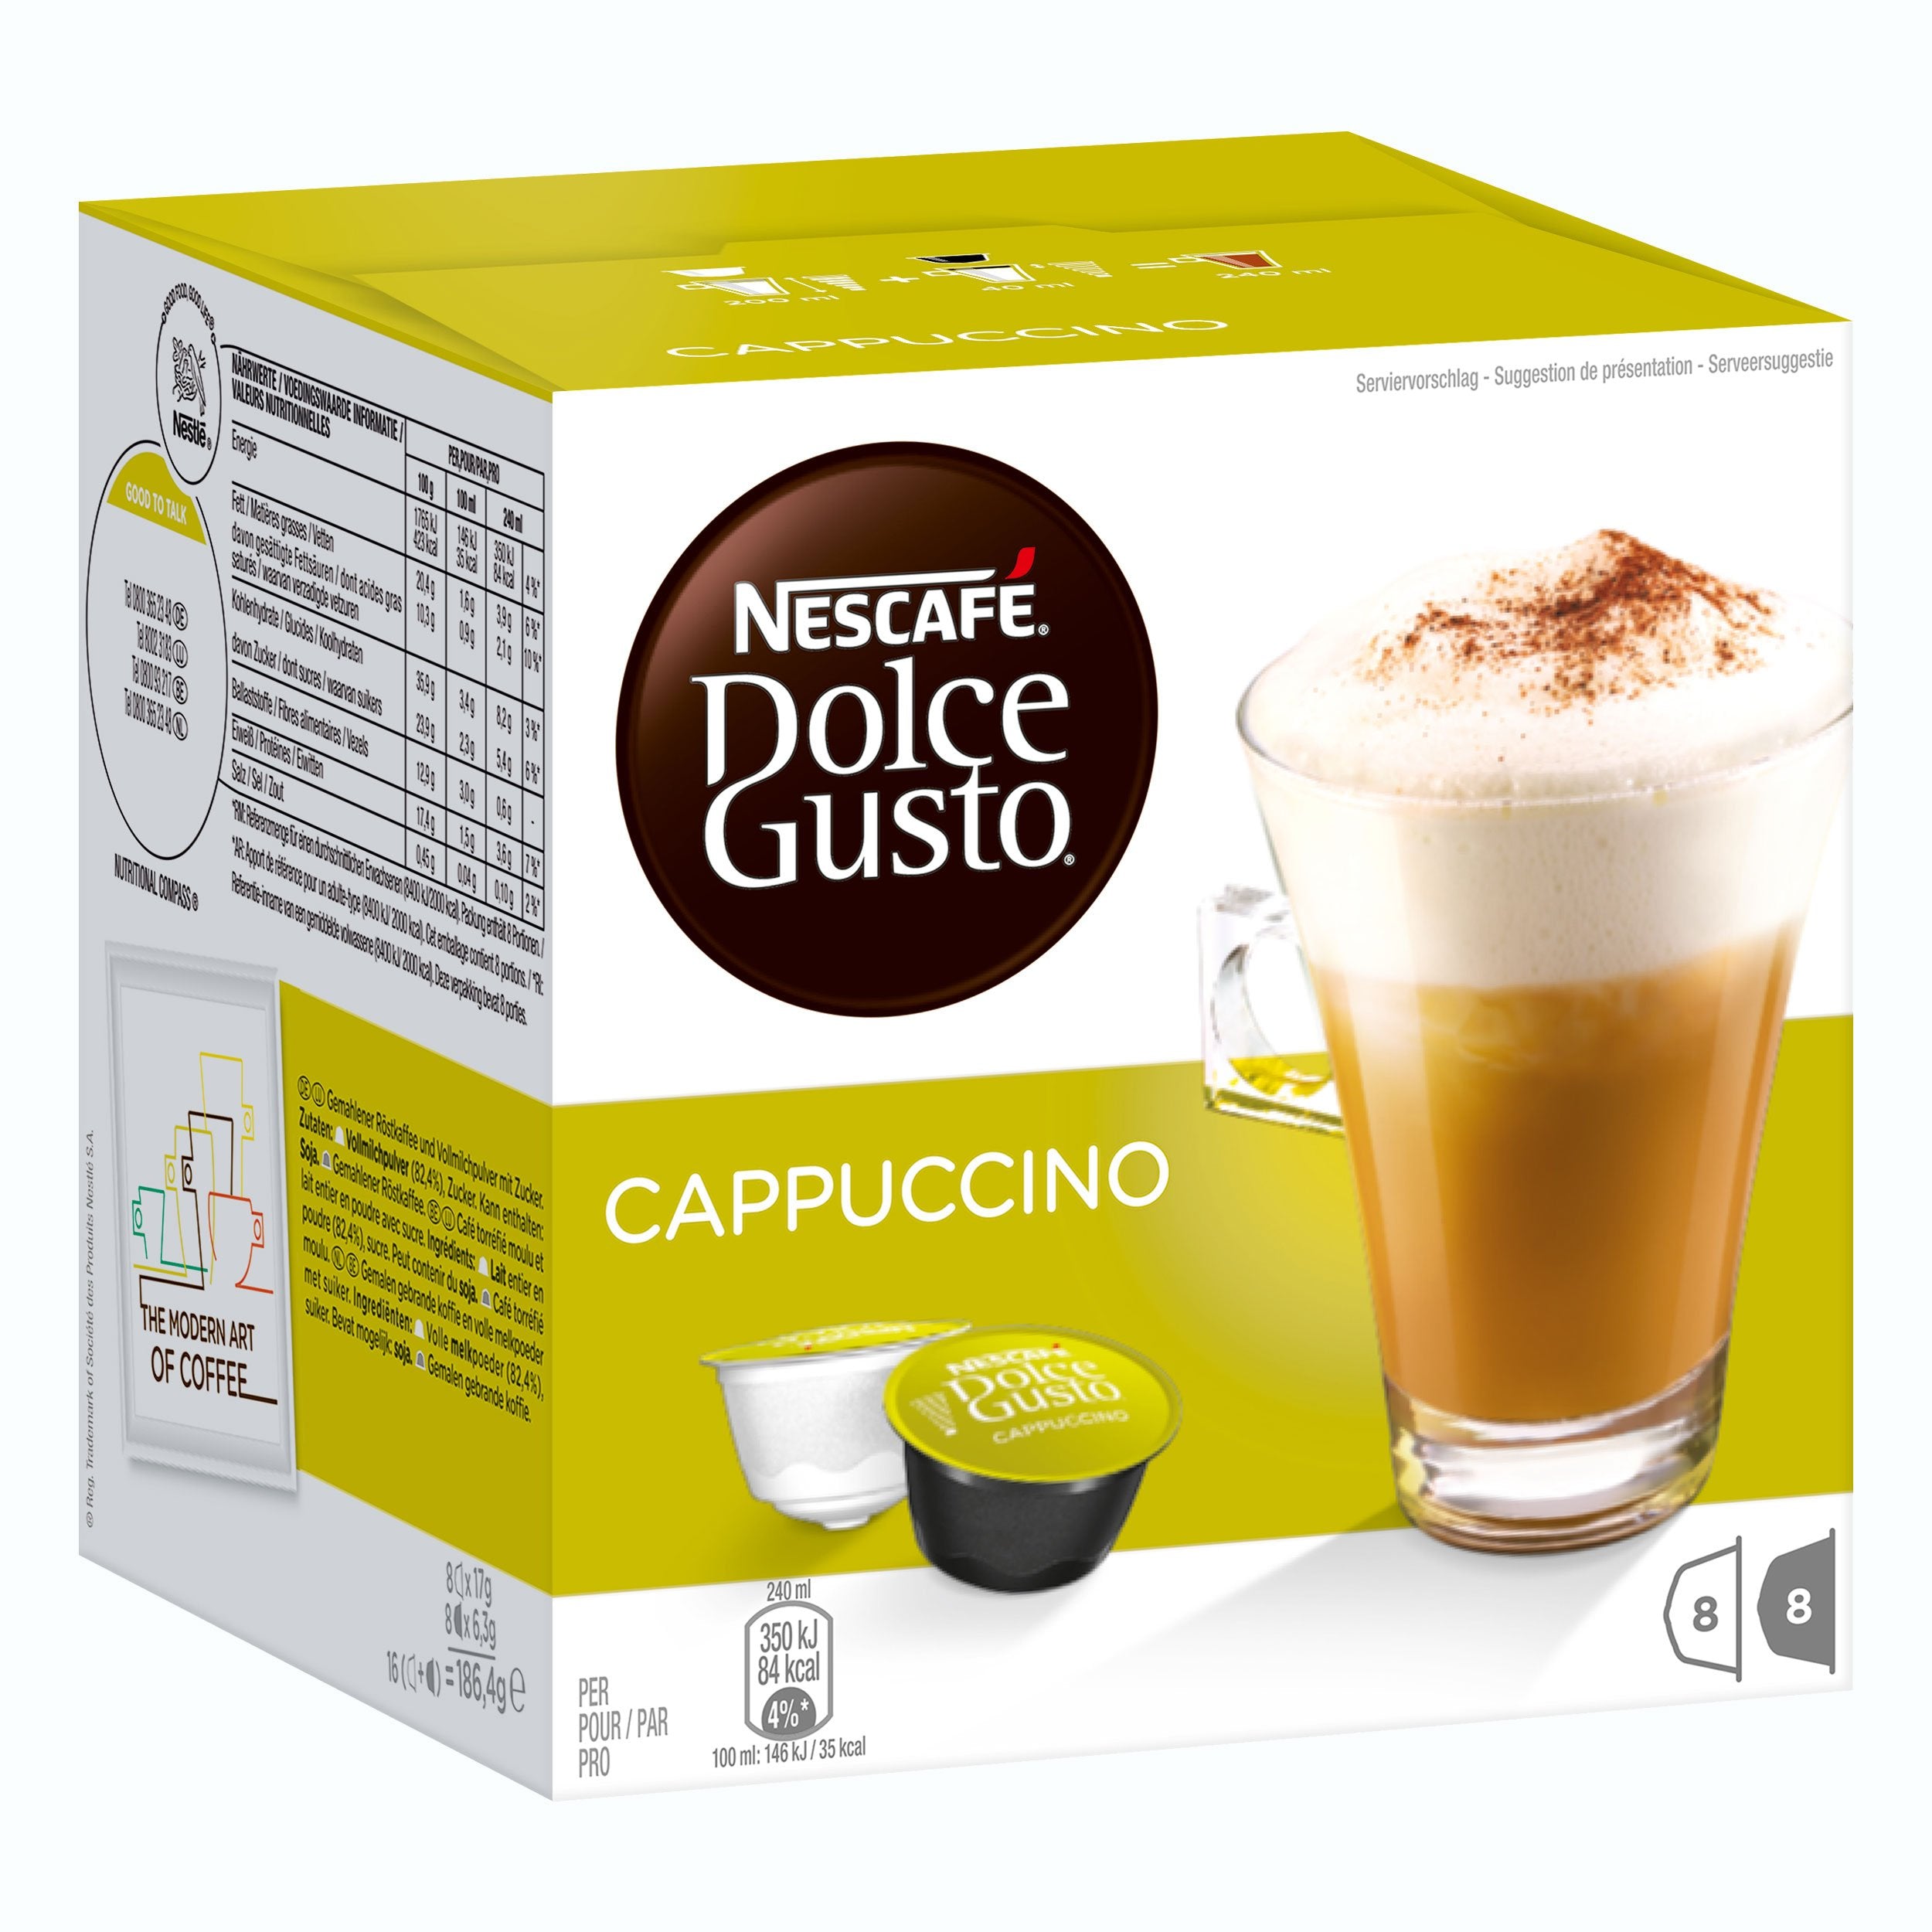 Nescafe Dolce Gusto Cappucino Capsules 16Capsules - 186.4g - Pack of 3